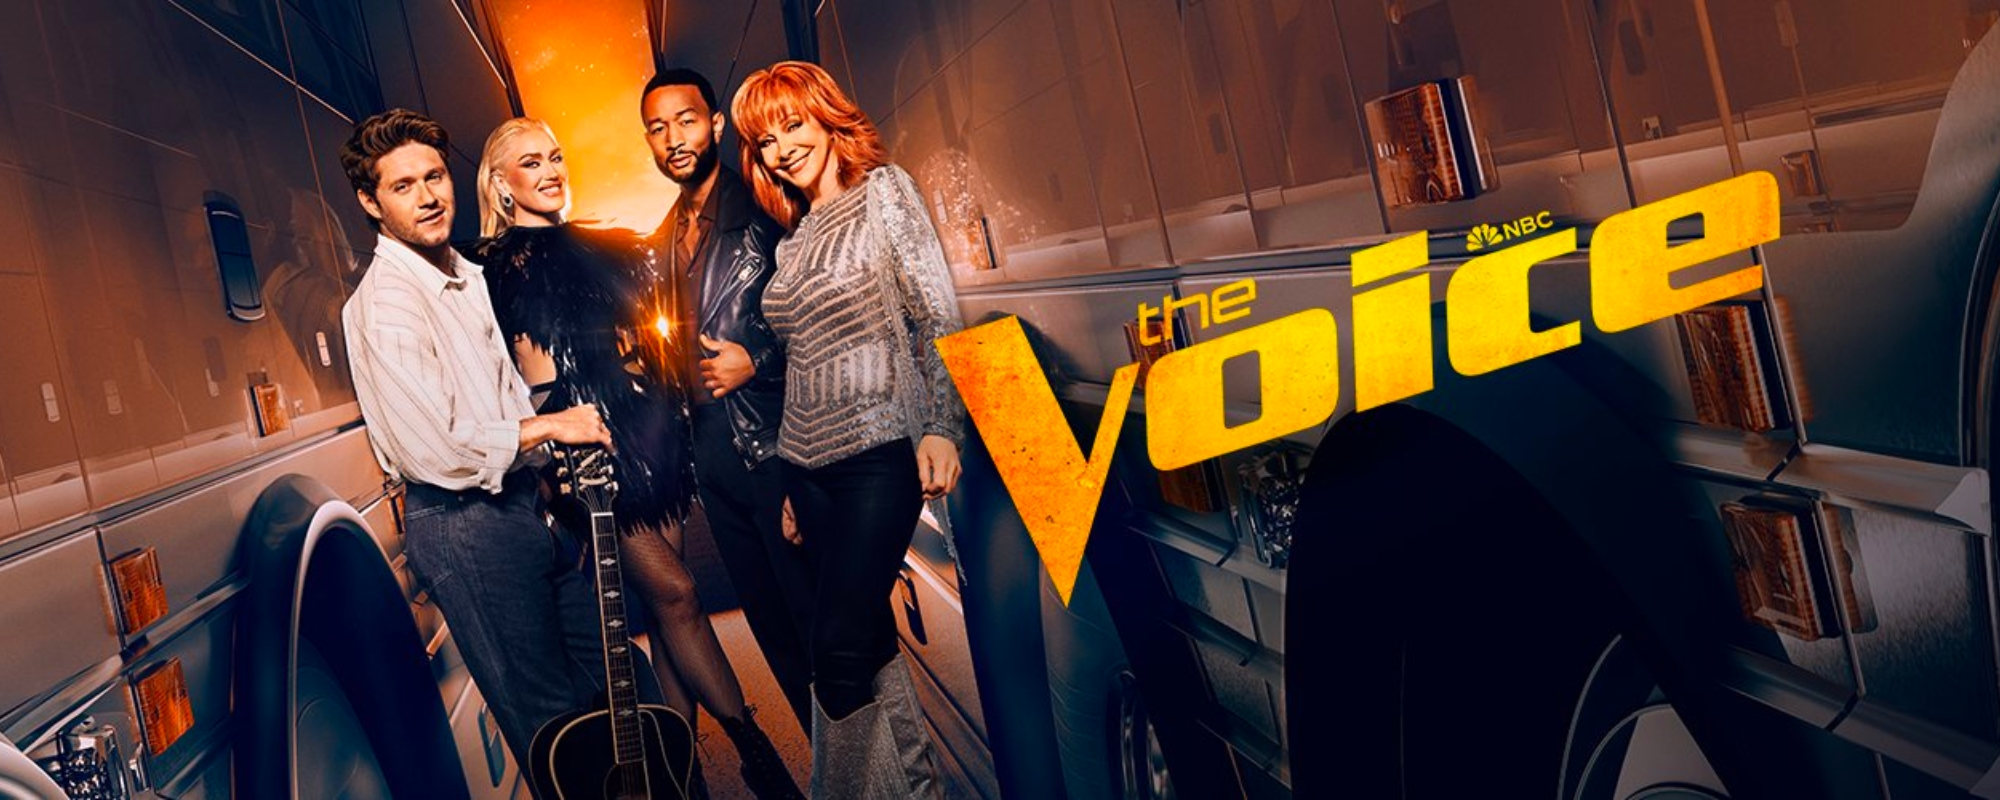 How to Watch ‘The Voice’ Tonight: Air Time, Channel and Streaming